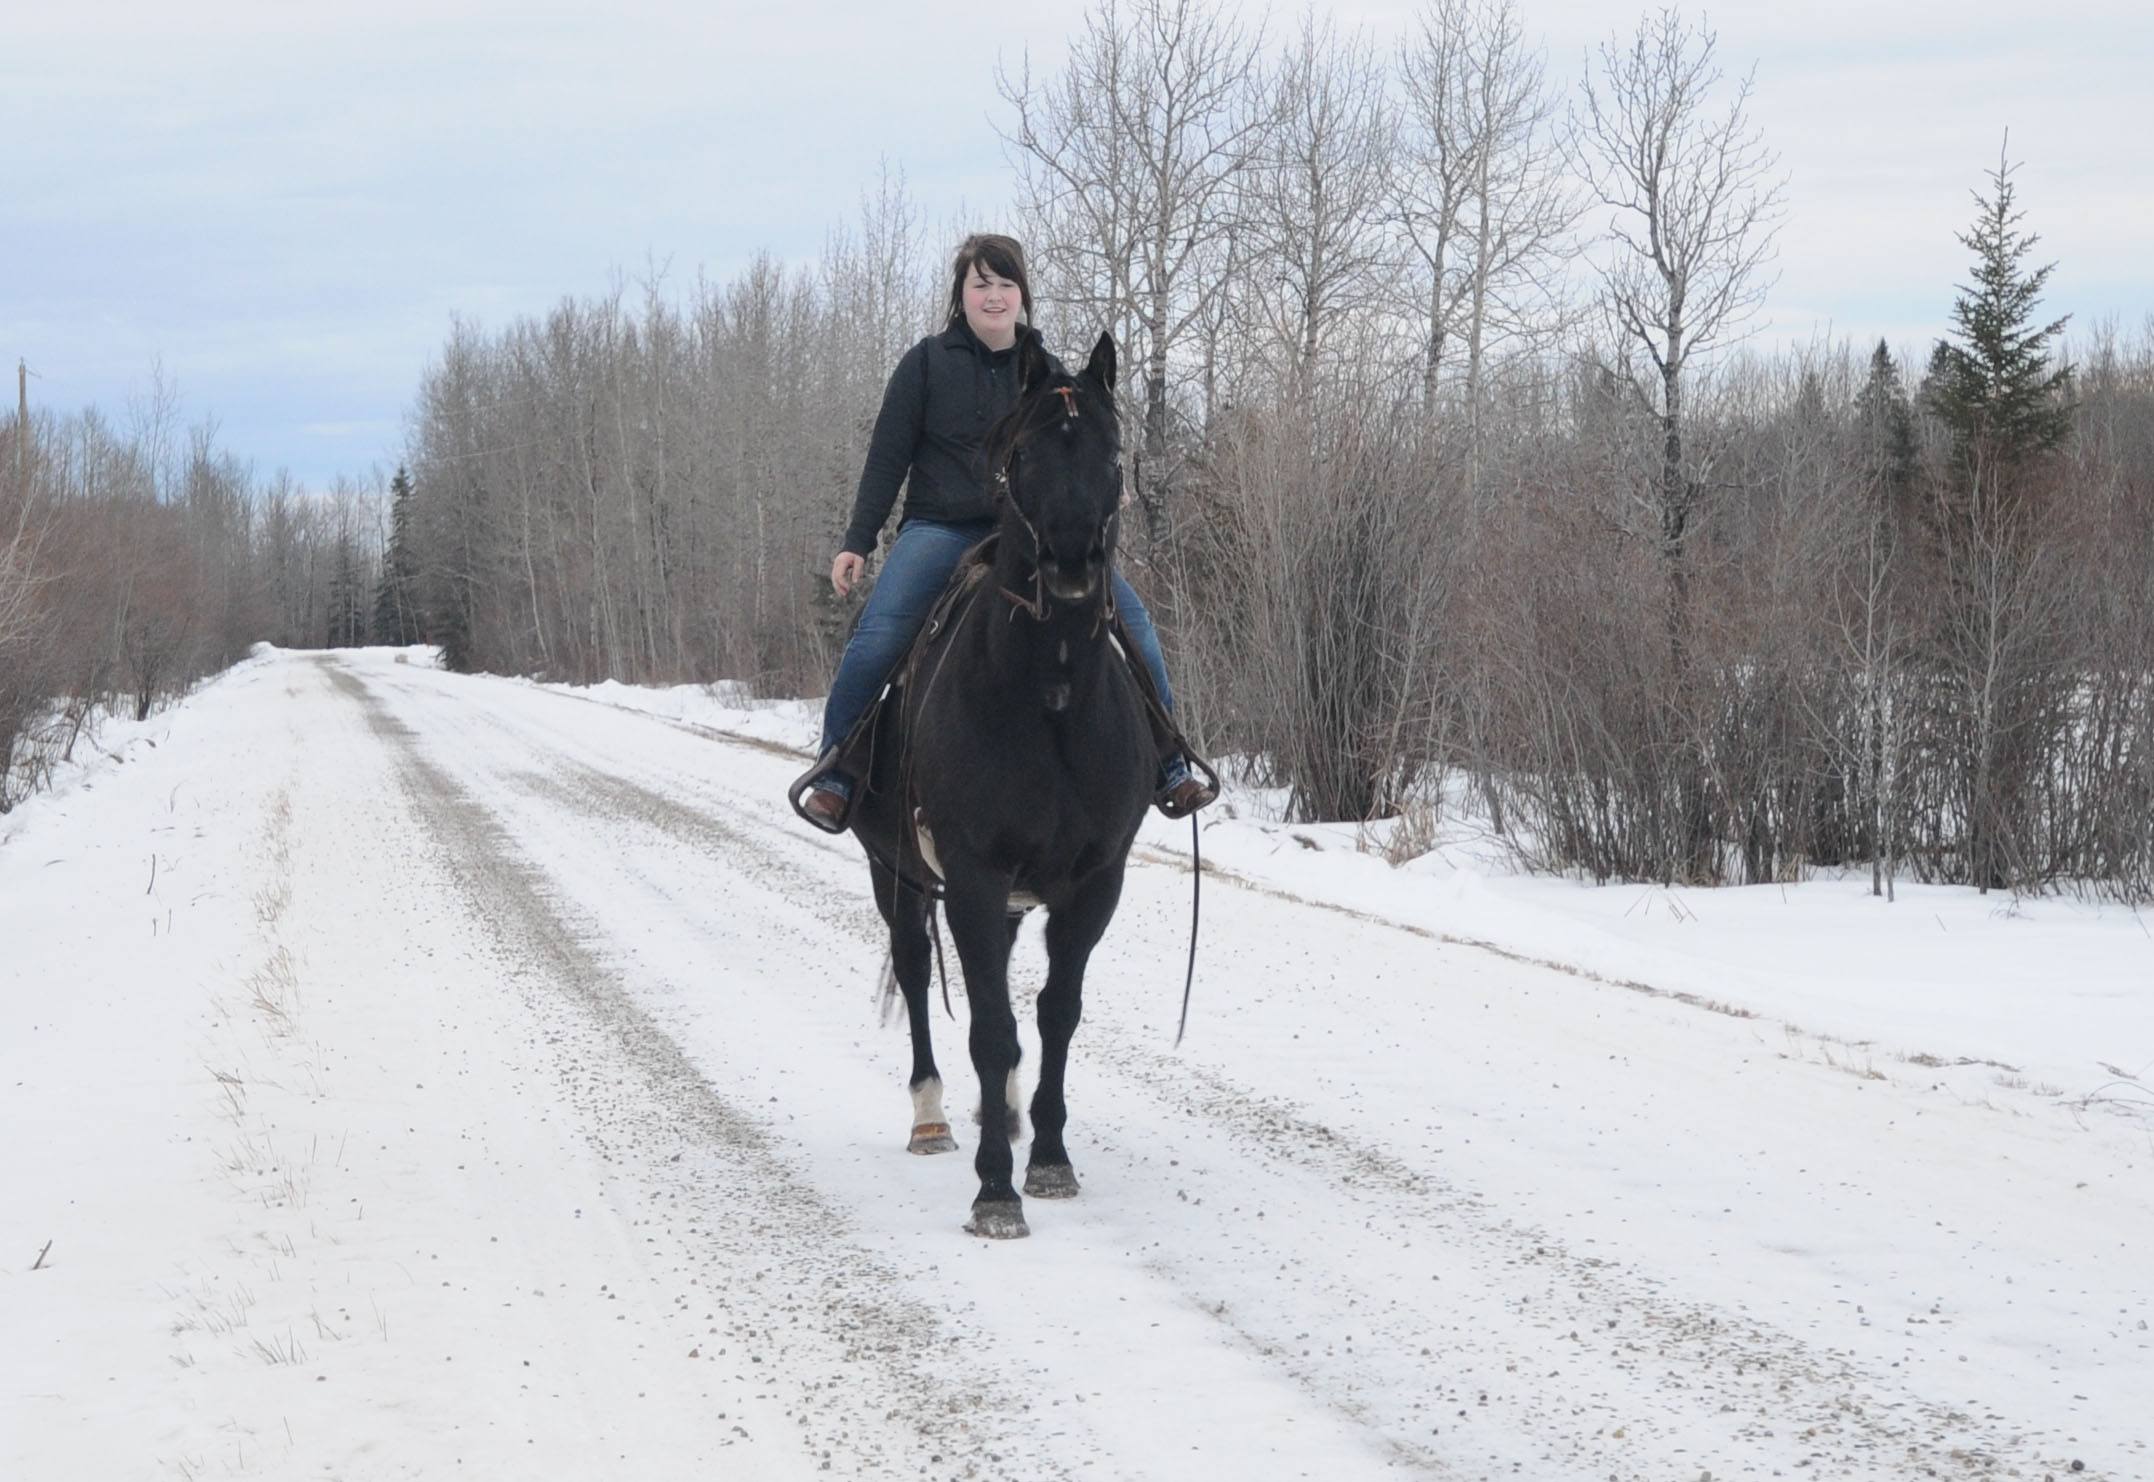 COUNTRY RIDE- Megan Klain takes her horse Ben for a little ride along a country road recently.